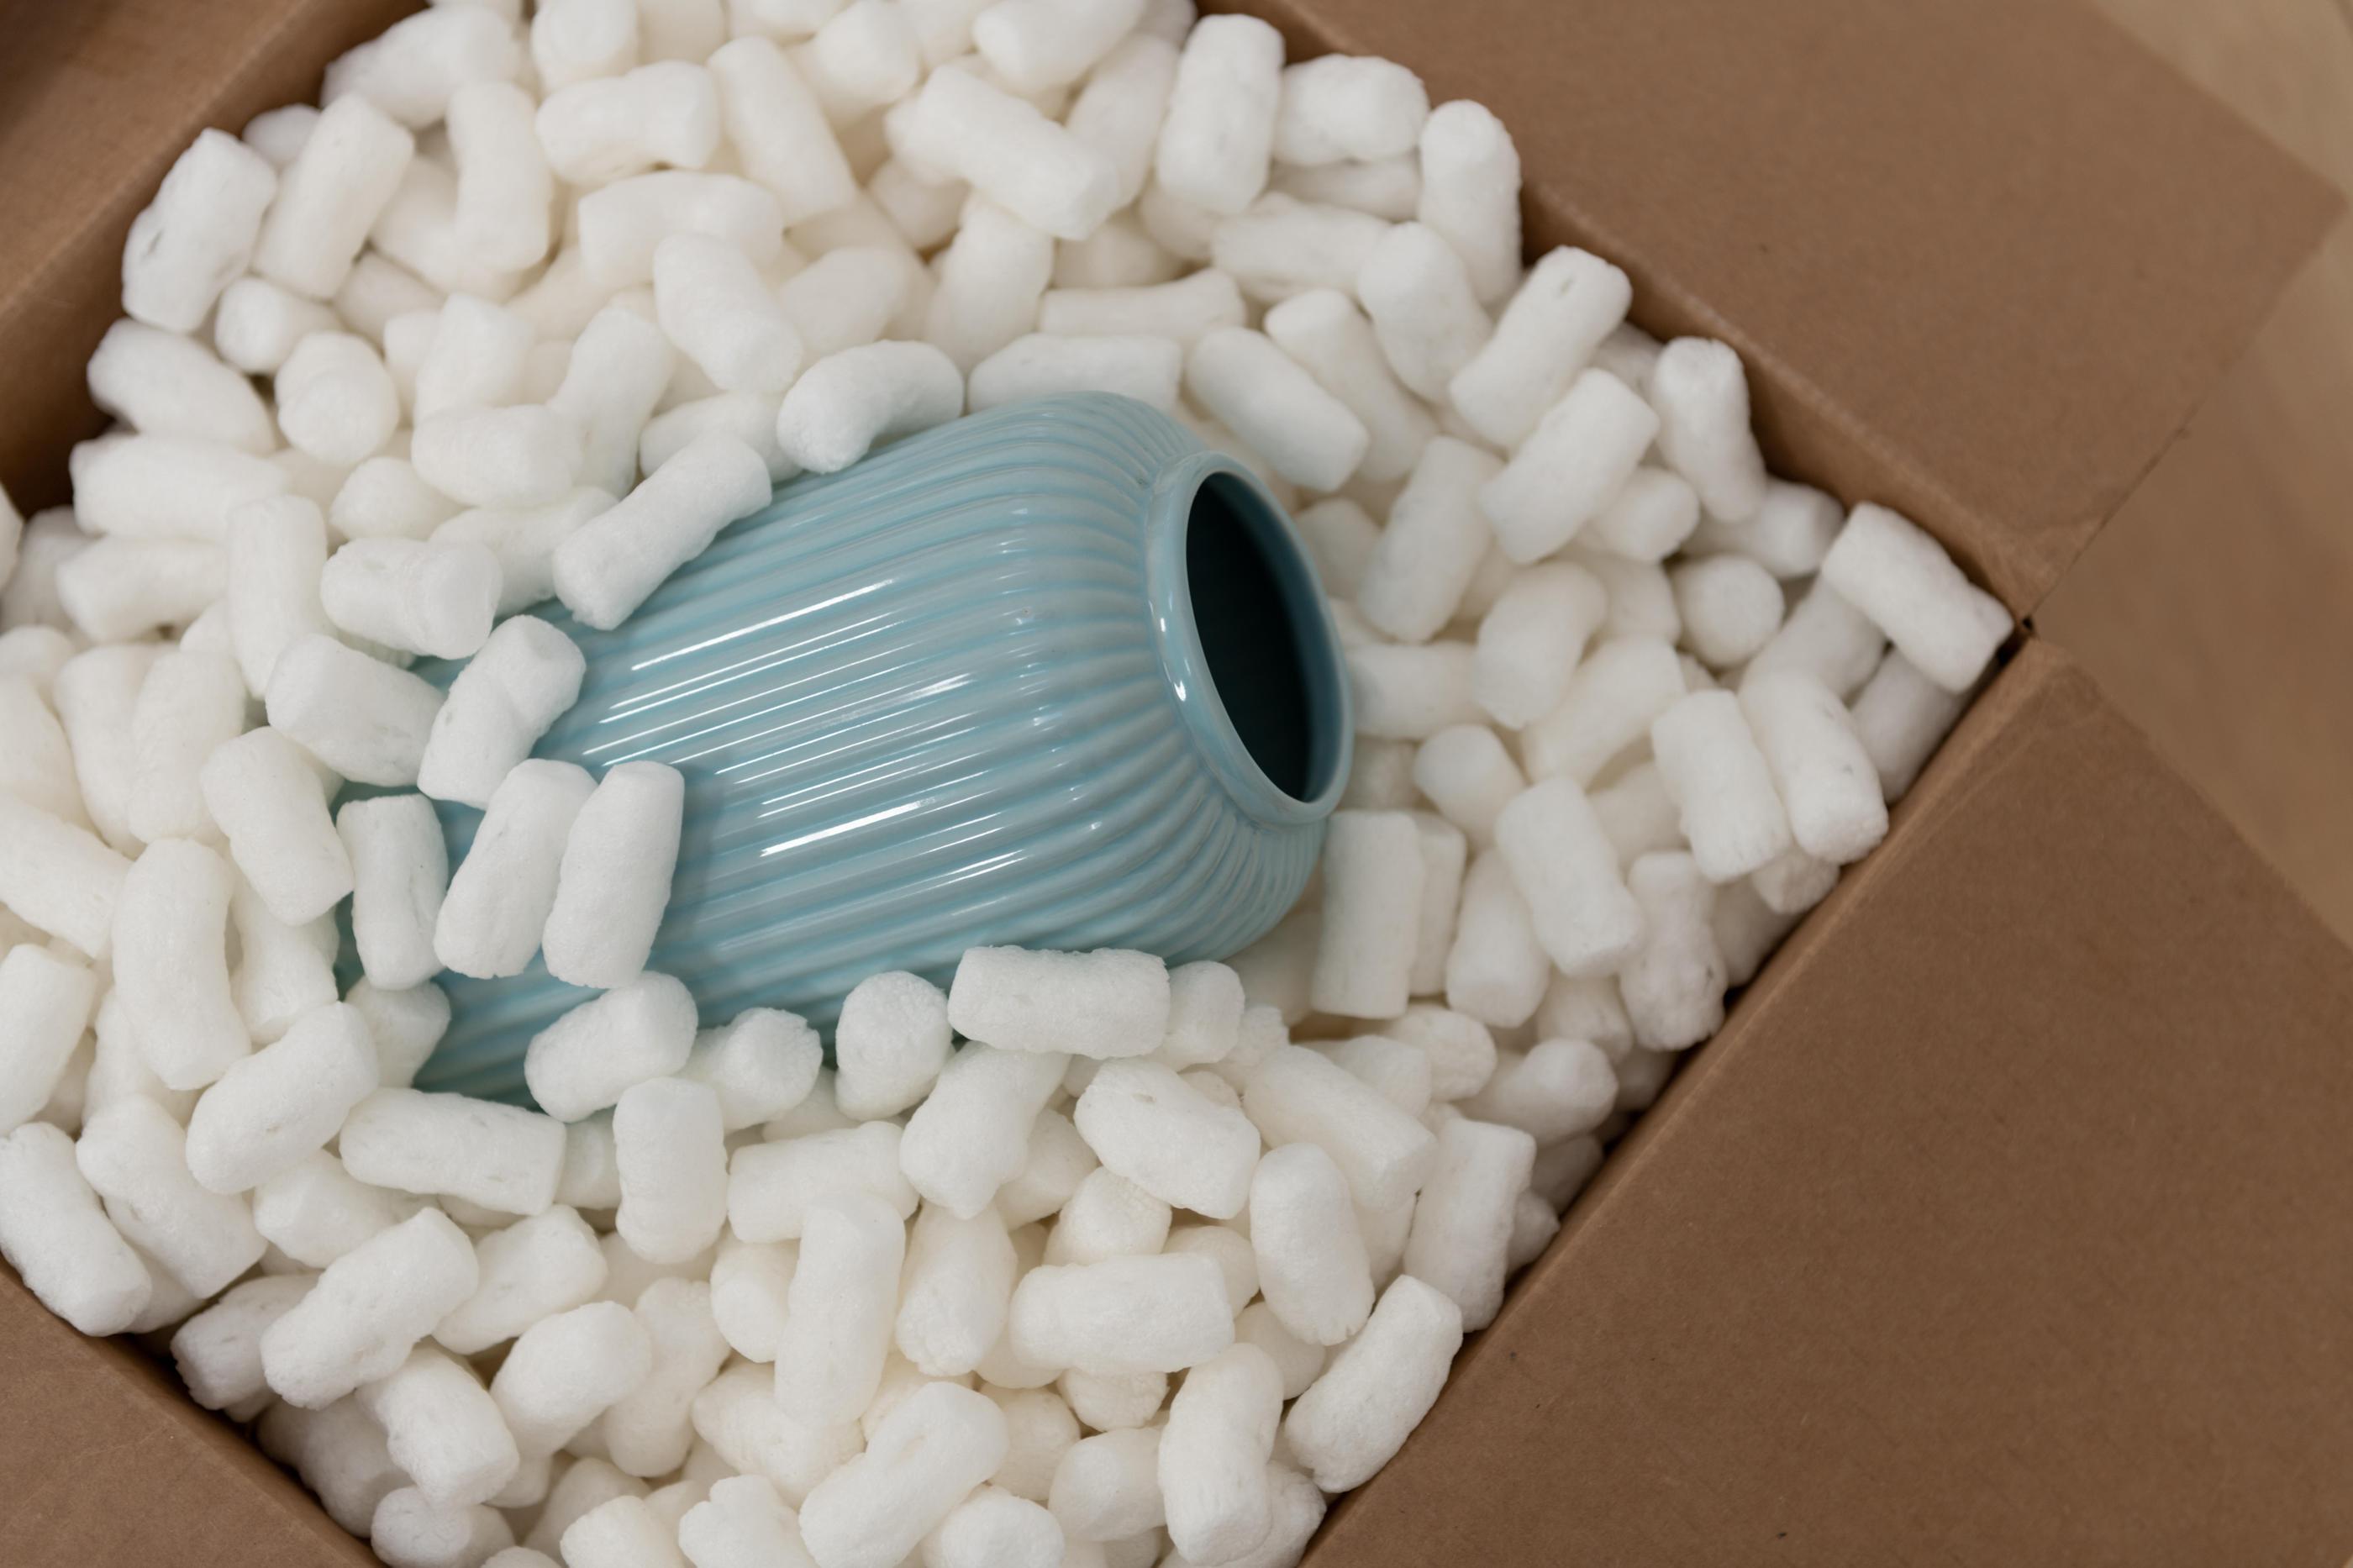 Box of packing peanuts holding a light blue vase